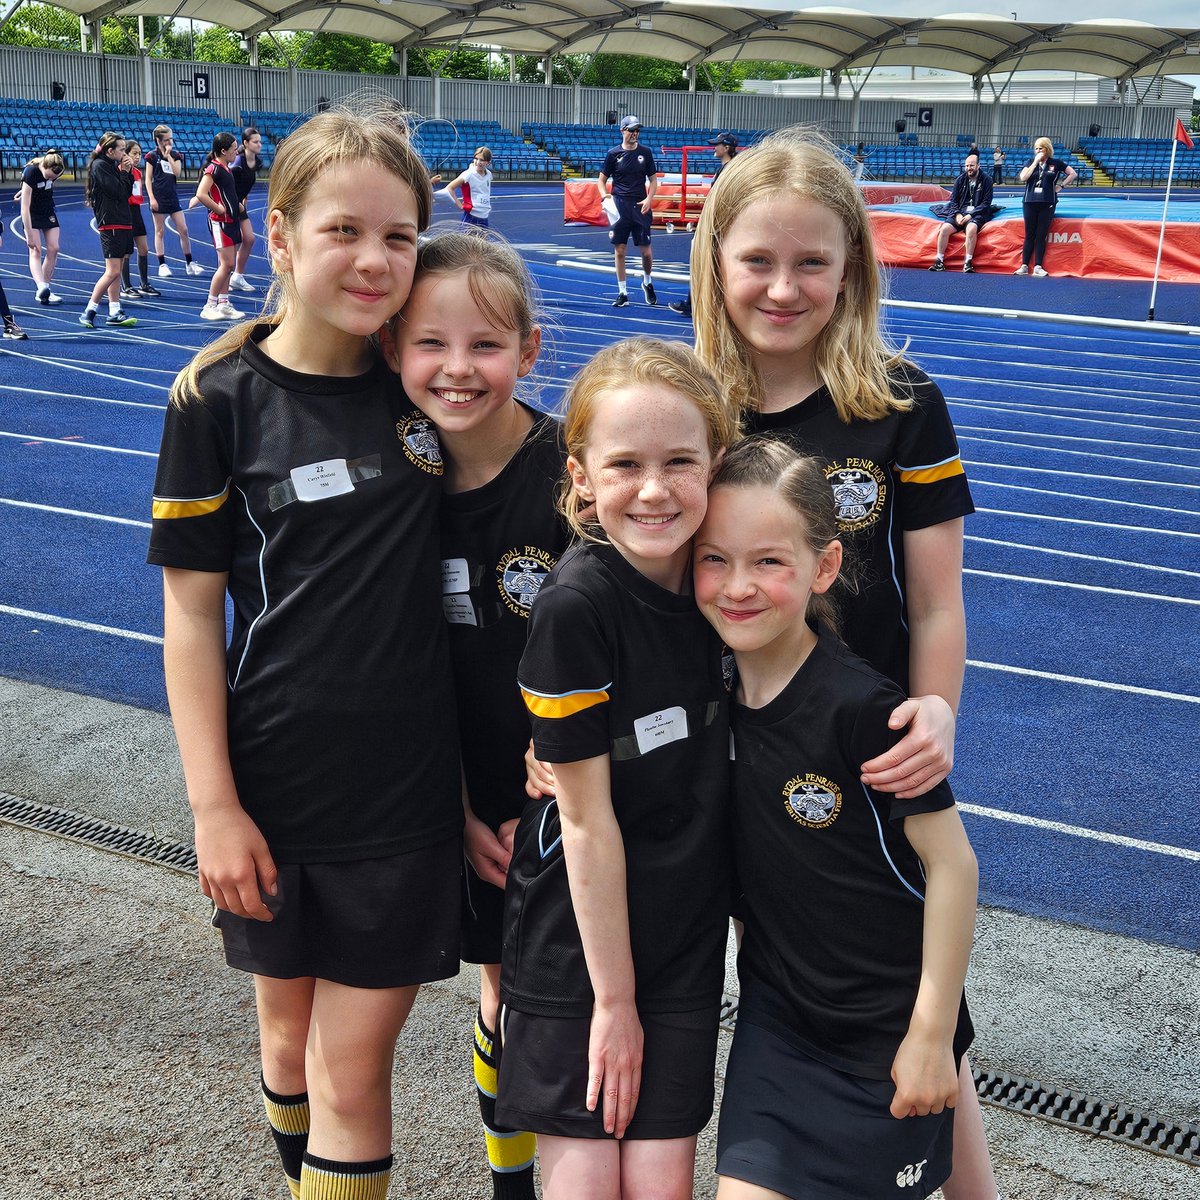 𝗔𝗧𝗛𝗟𝗘𝗧𝗜𝗖𝗦: Yesterday was a fantastic day for our Prep pupils as they travelled to an Independent Schools Association athletics competition. Just one part of the extensive sporting calendar at Rydal Penrhos! #RPInspires